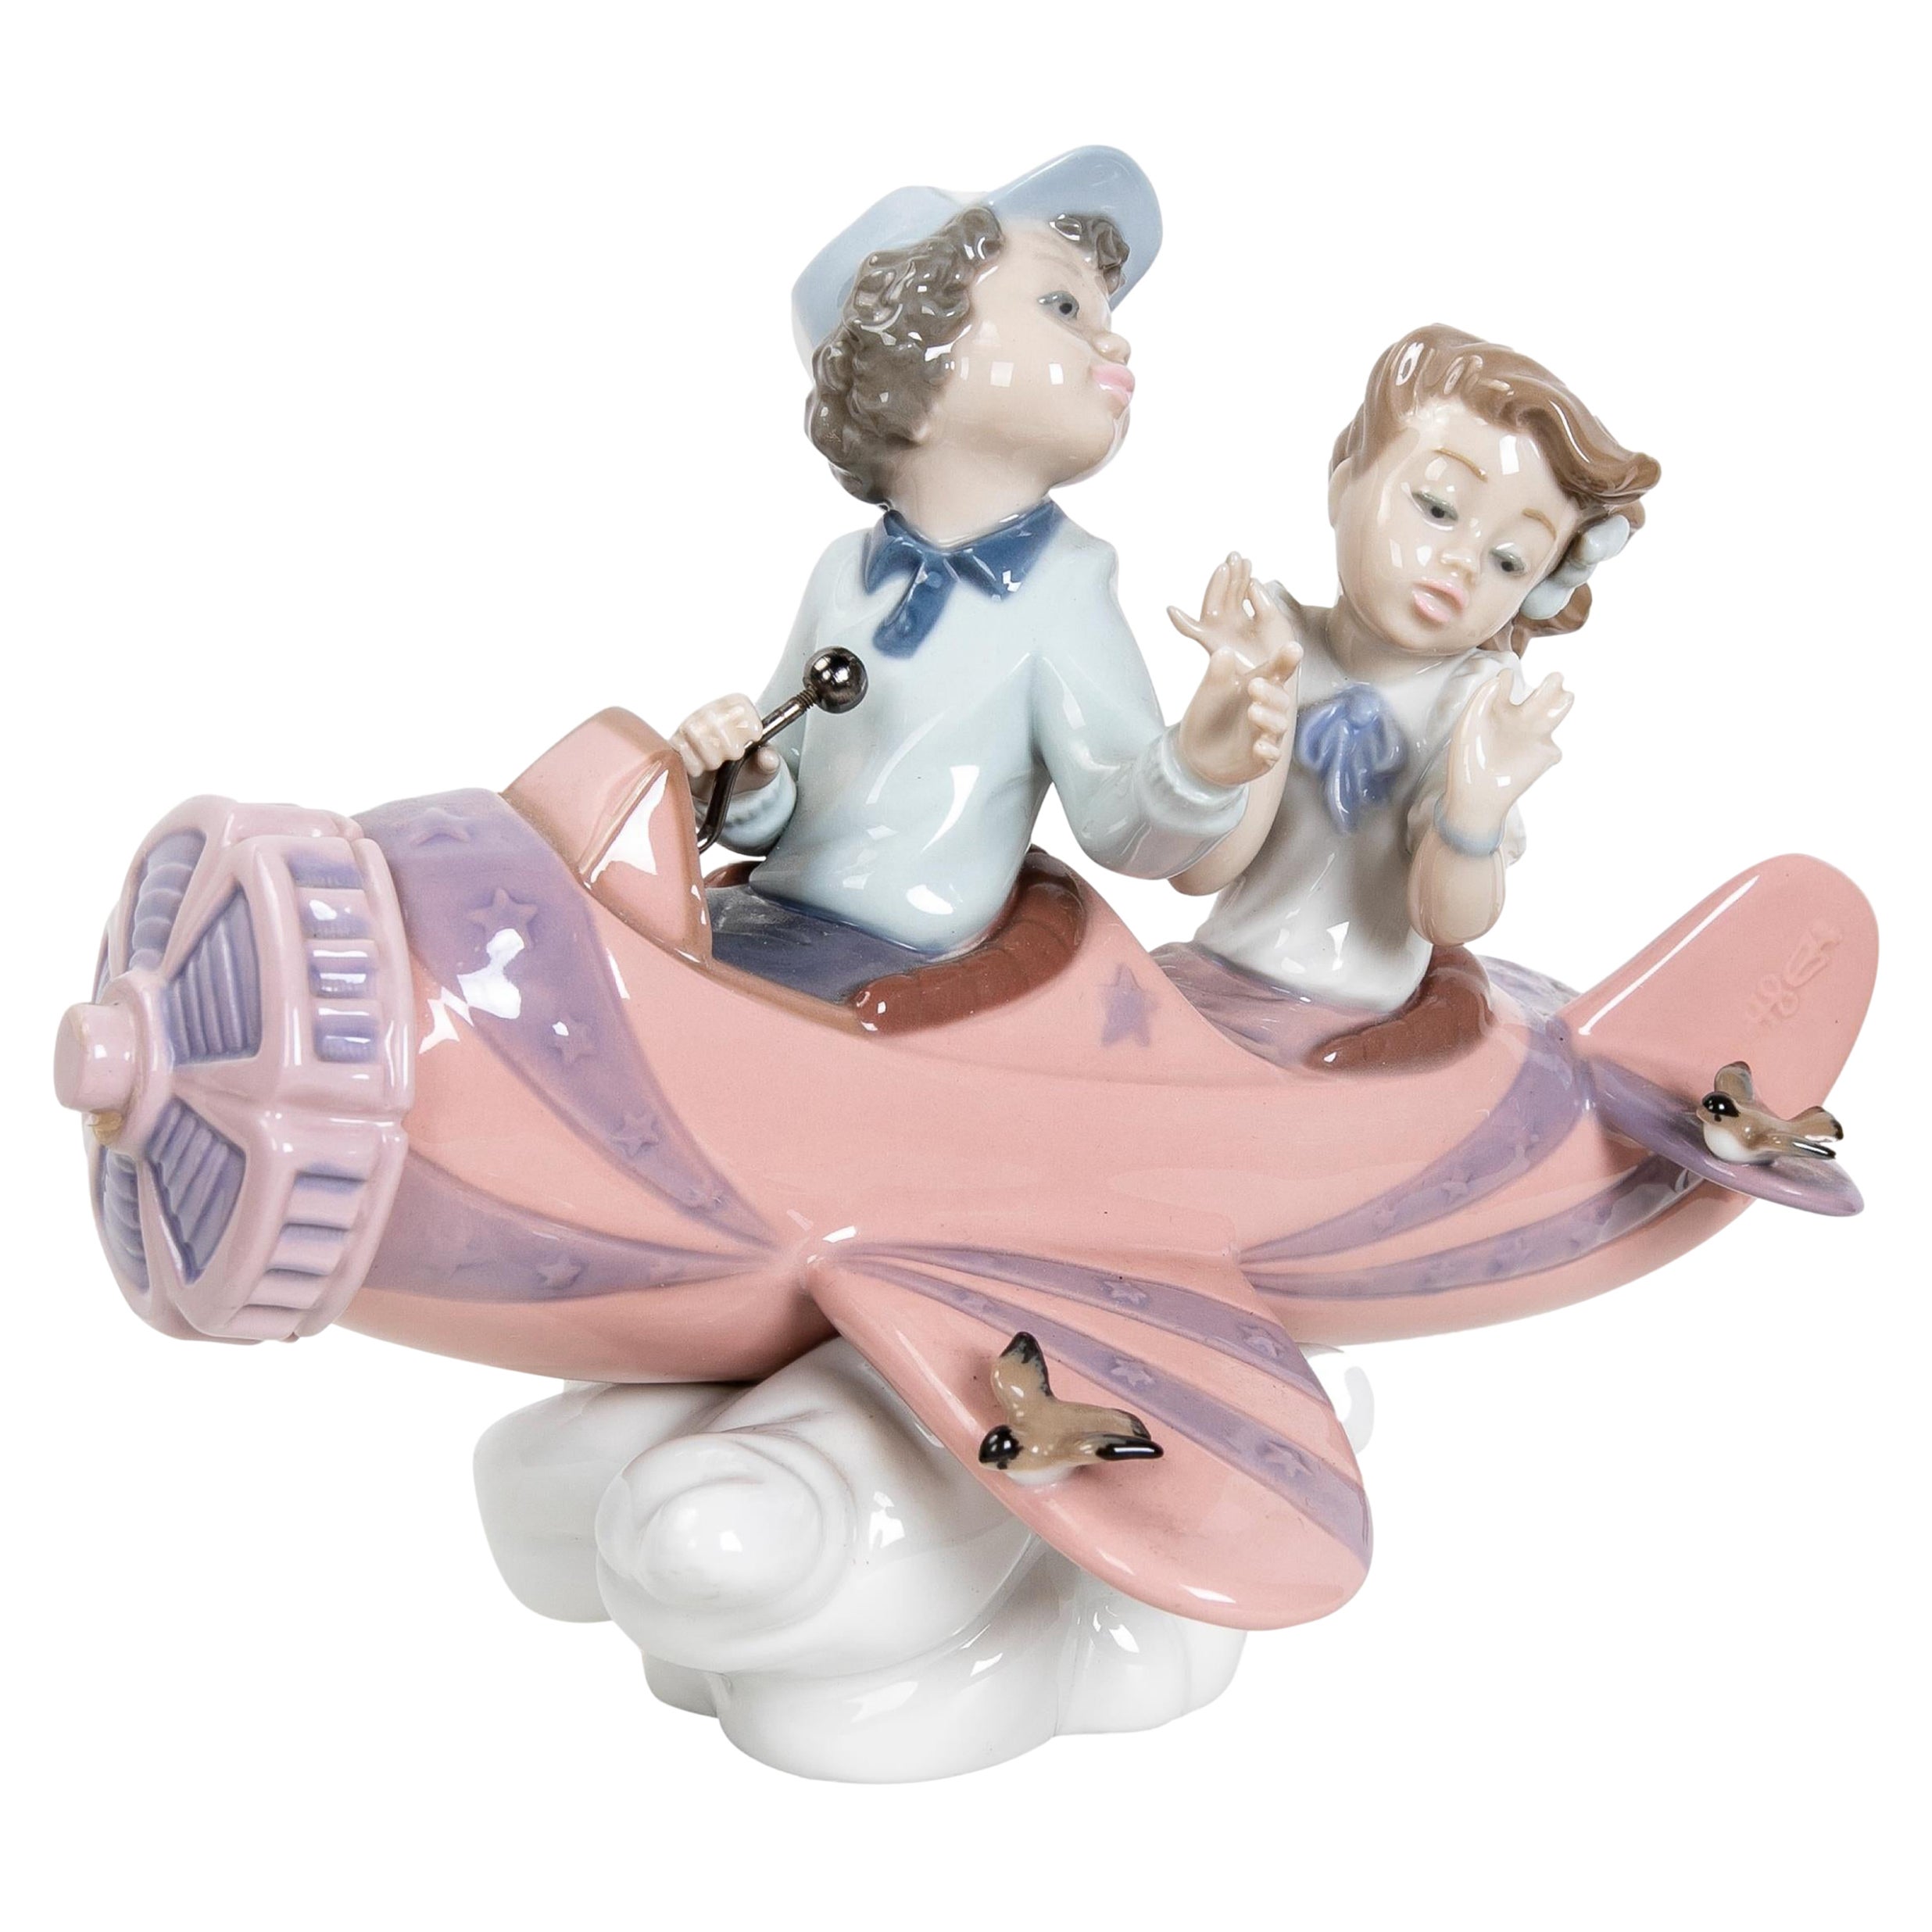 1989 Porcelain Figure of Children in Airplane Signed by the House of LLadró For Sale